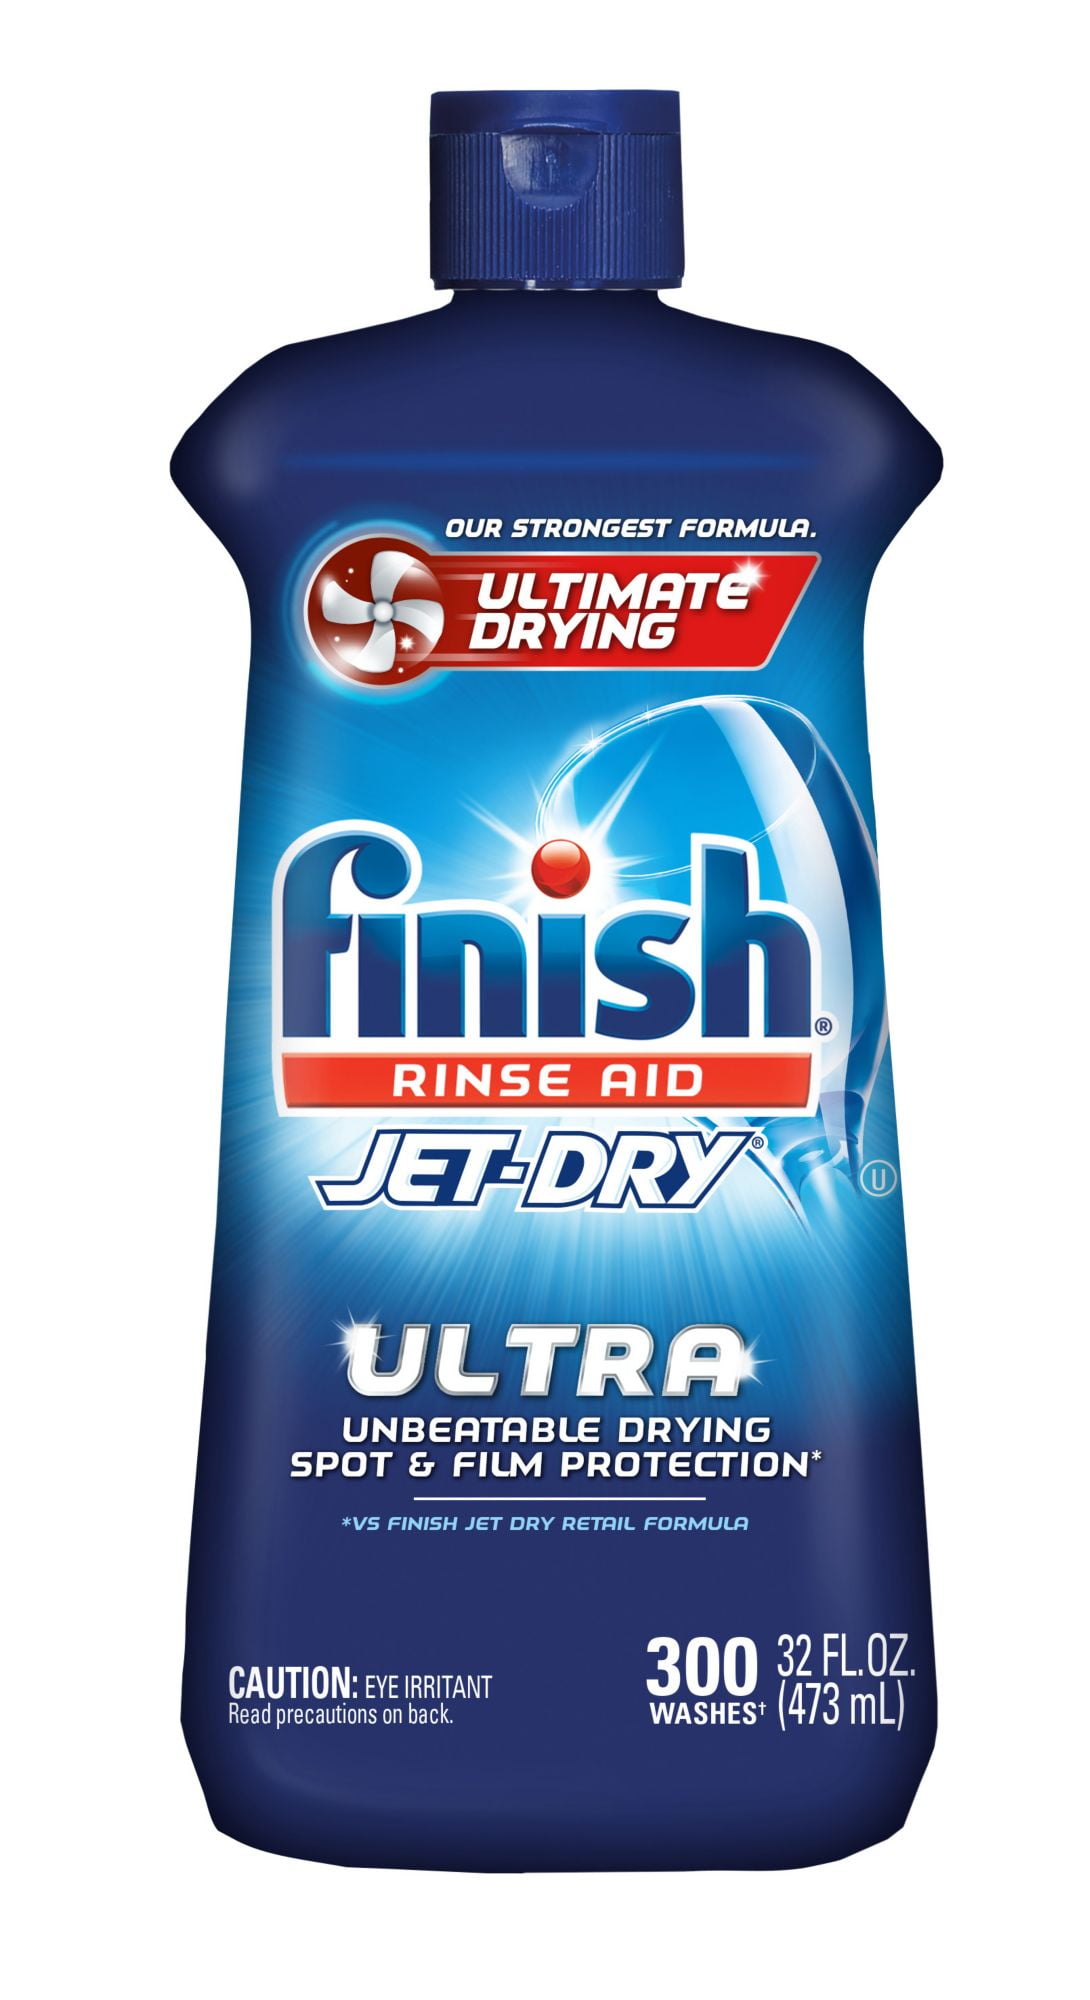 Finish Jet-dry Rinse Agent Liquid, 32 Fl Oz as low as $8.11 After Coupon  (Reg. $13.47) + Free Shipping - Makes 300 Washes - Fabulessly Frugal